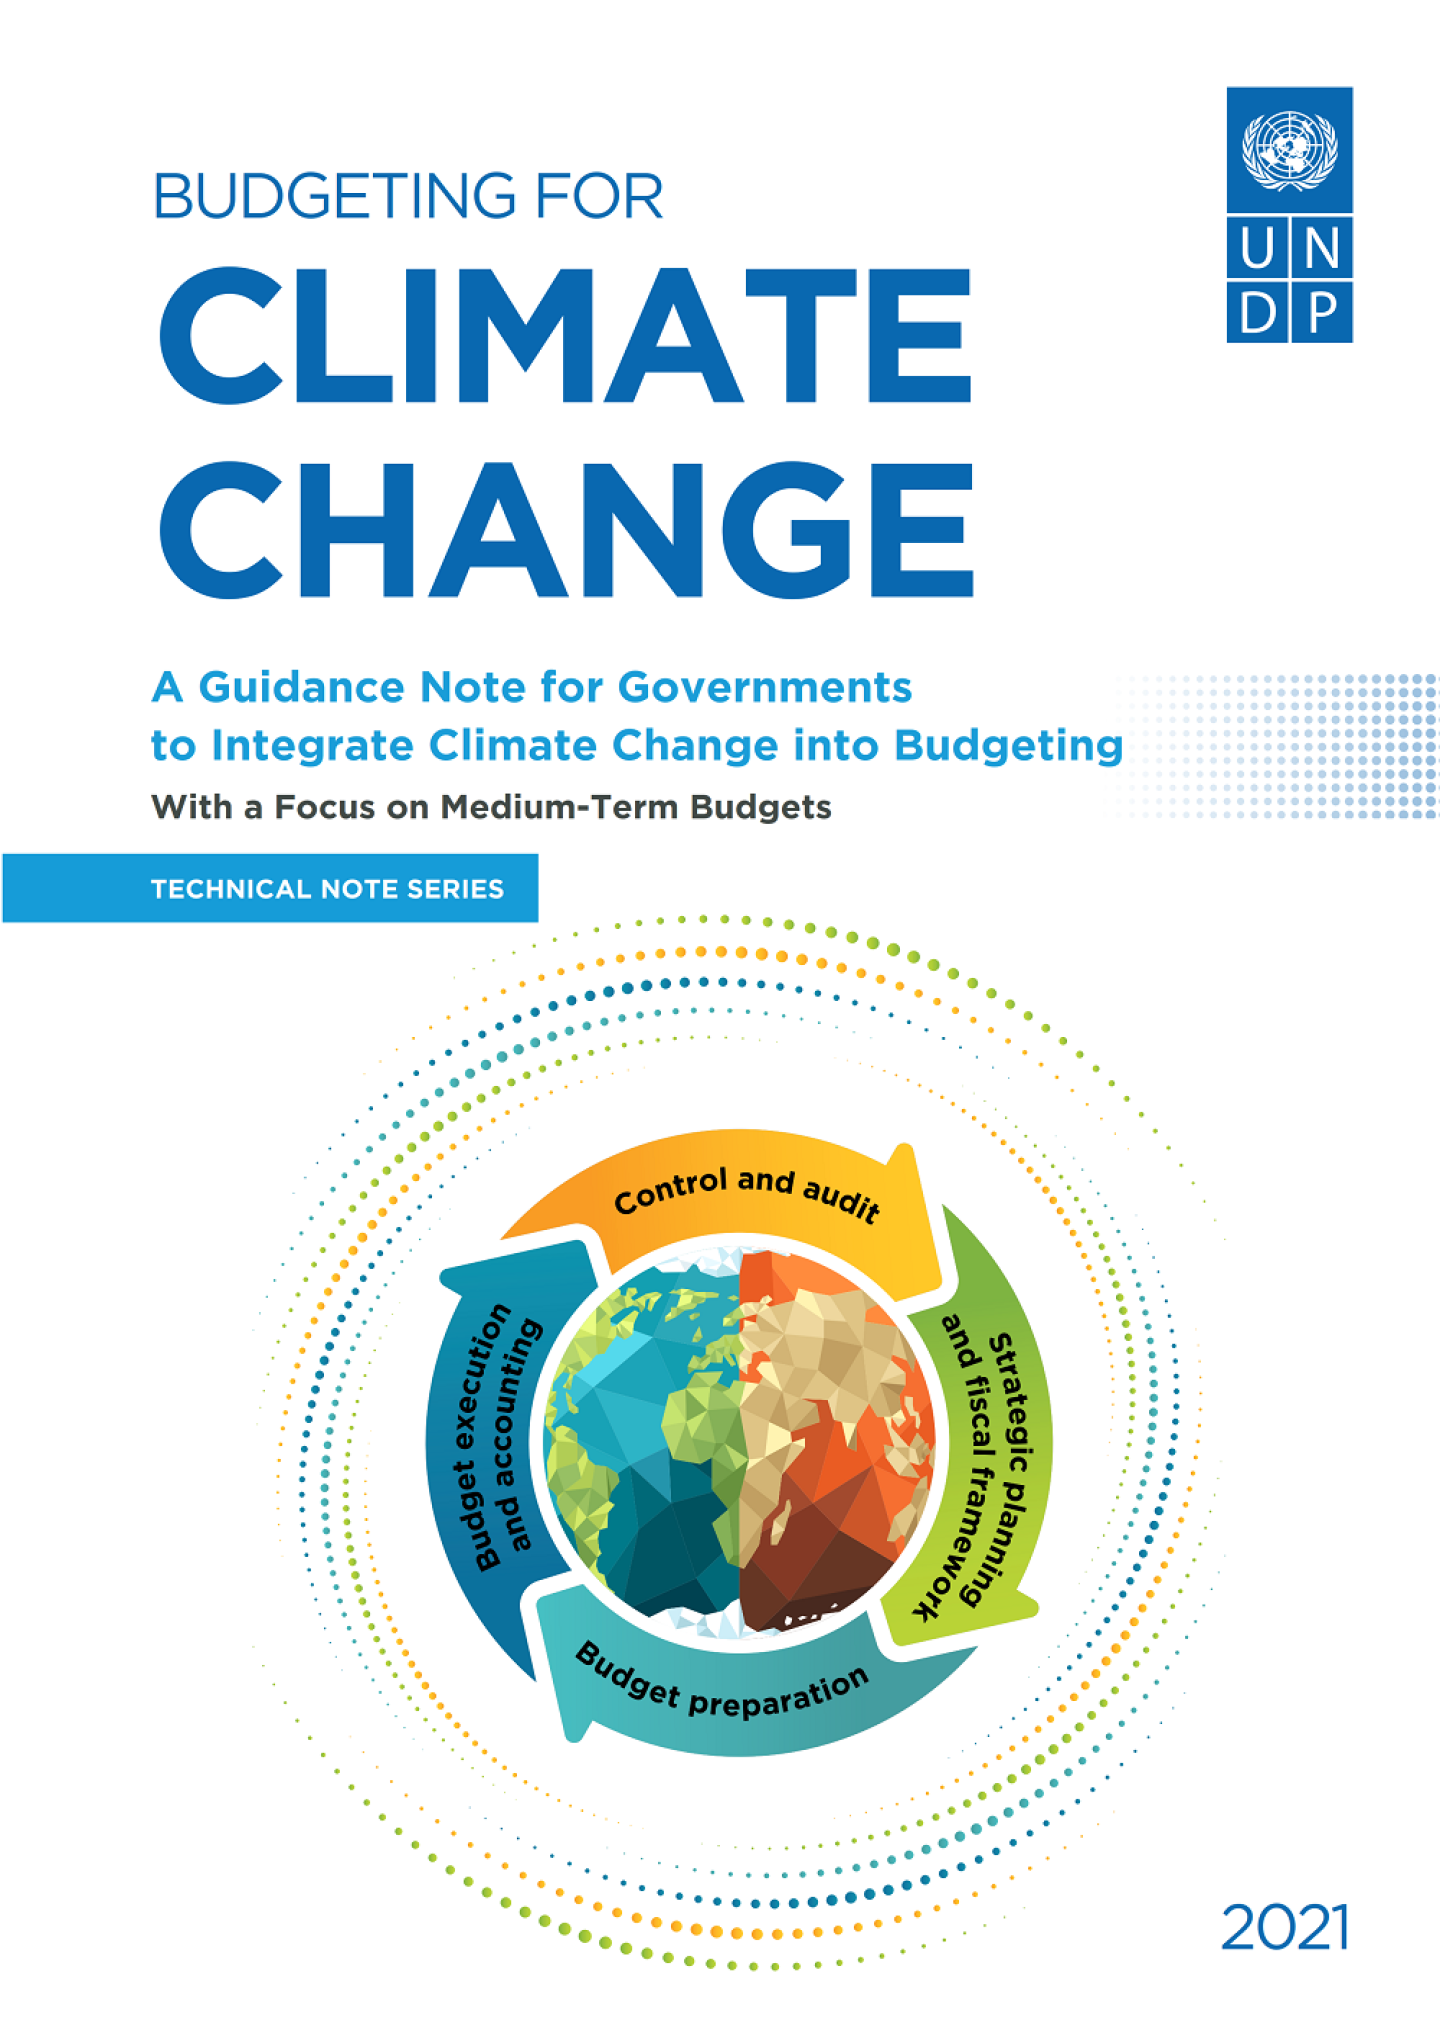 Budgeting for Climate Change: A Guidance Note for Governments to